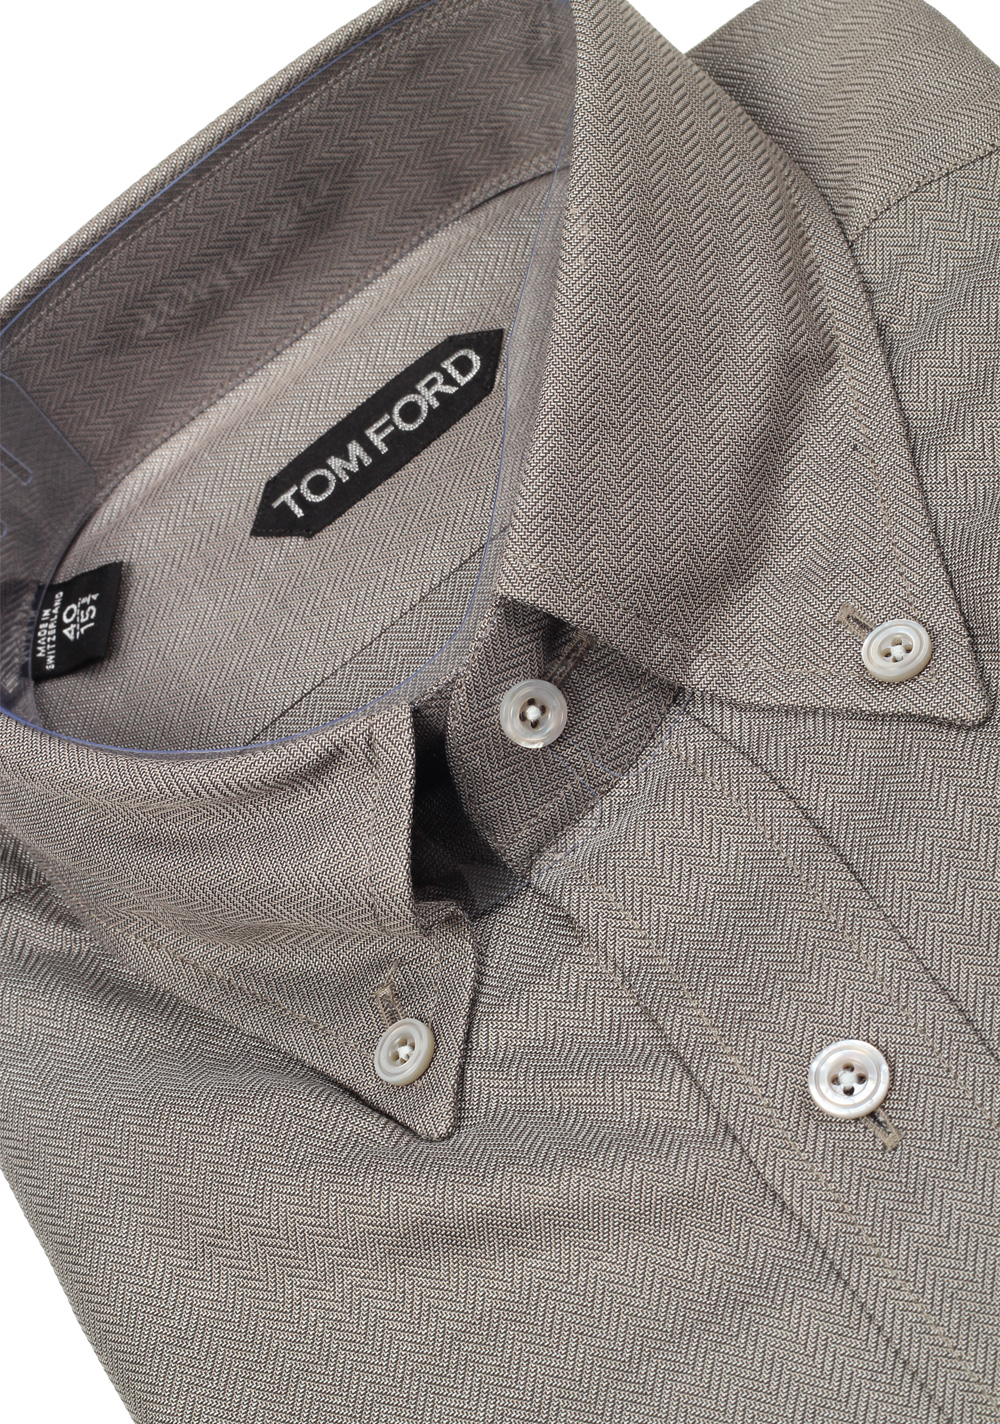 TOM FORD Solid Gray Button Down Dress Shirt Size 40 / 15,75 U.S. | Costume Limité